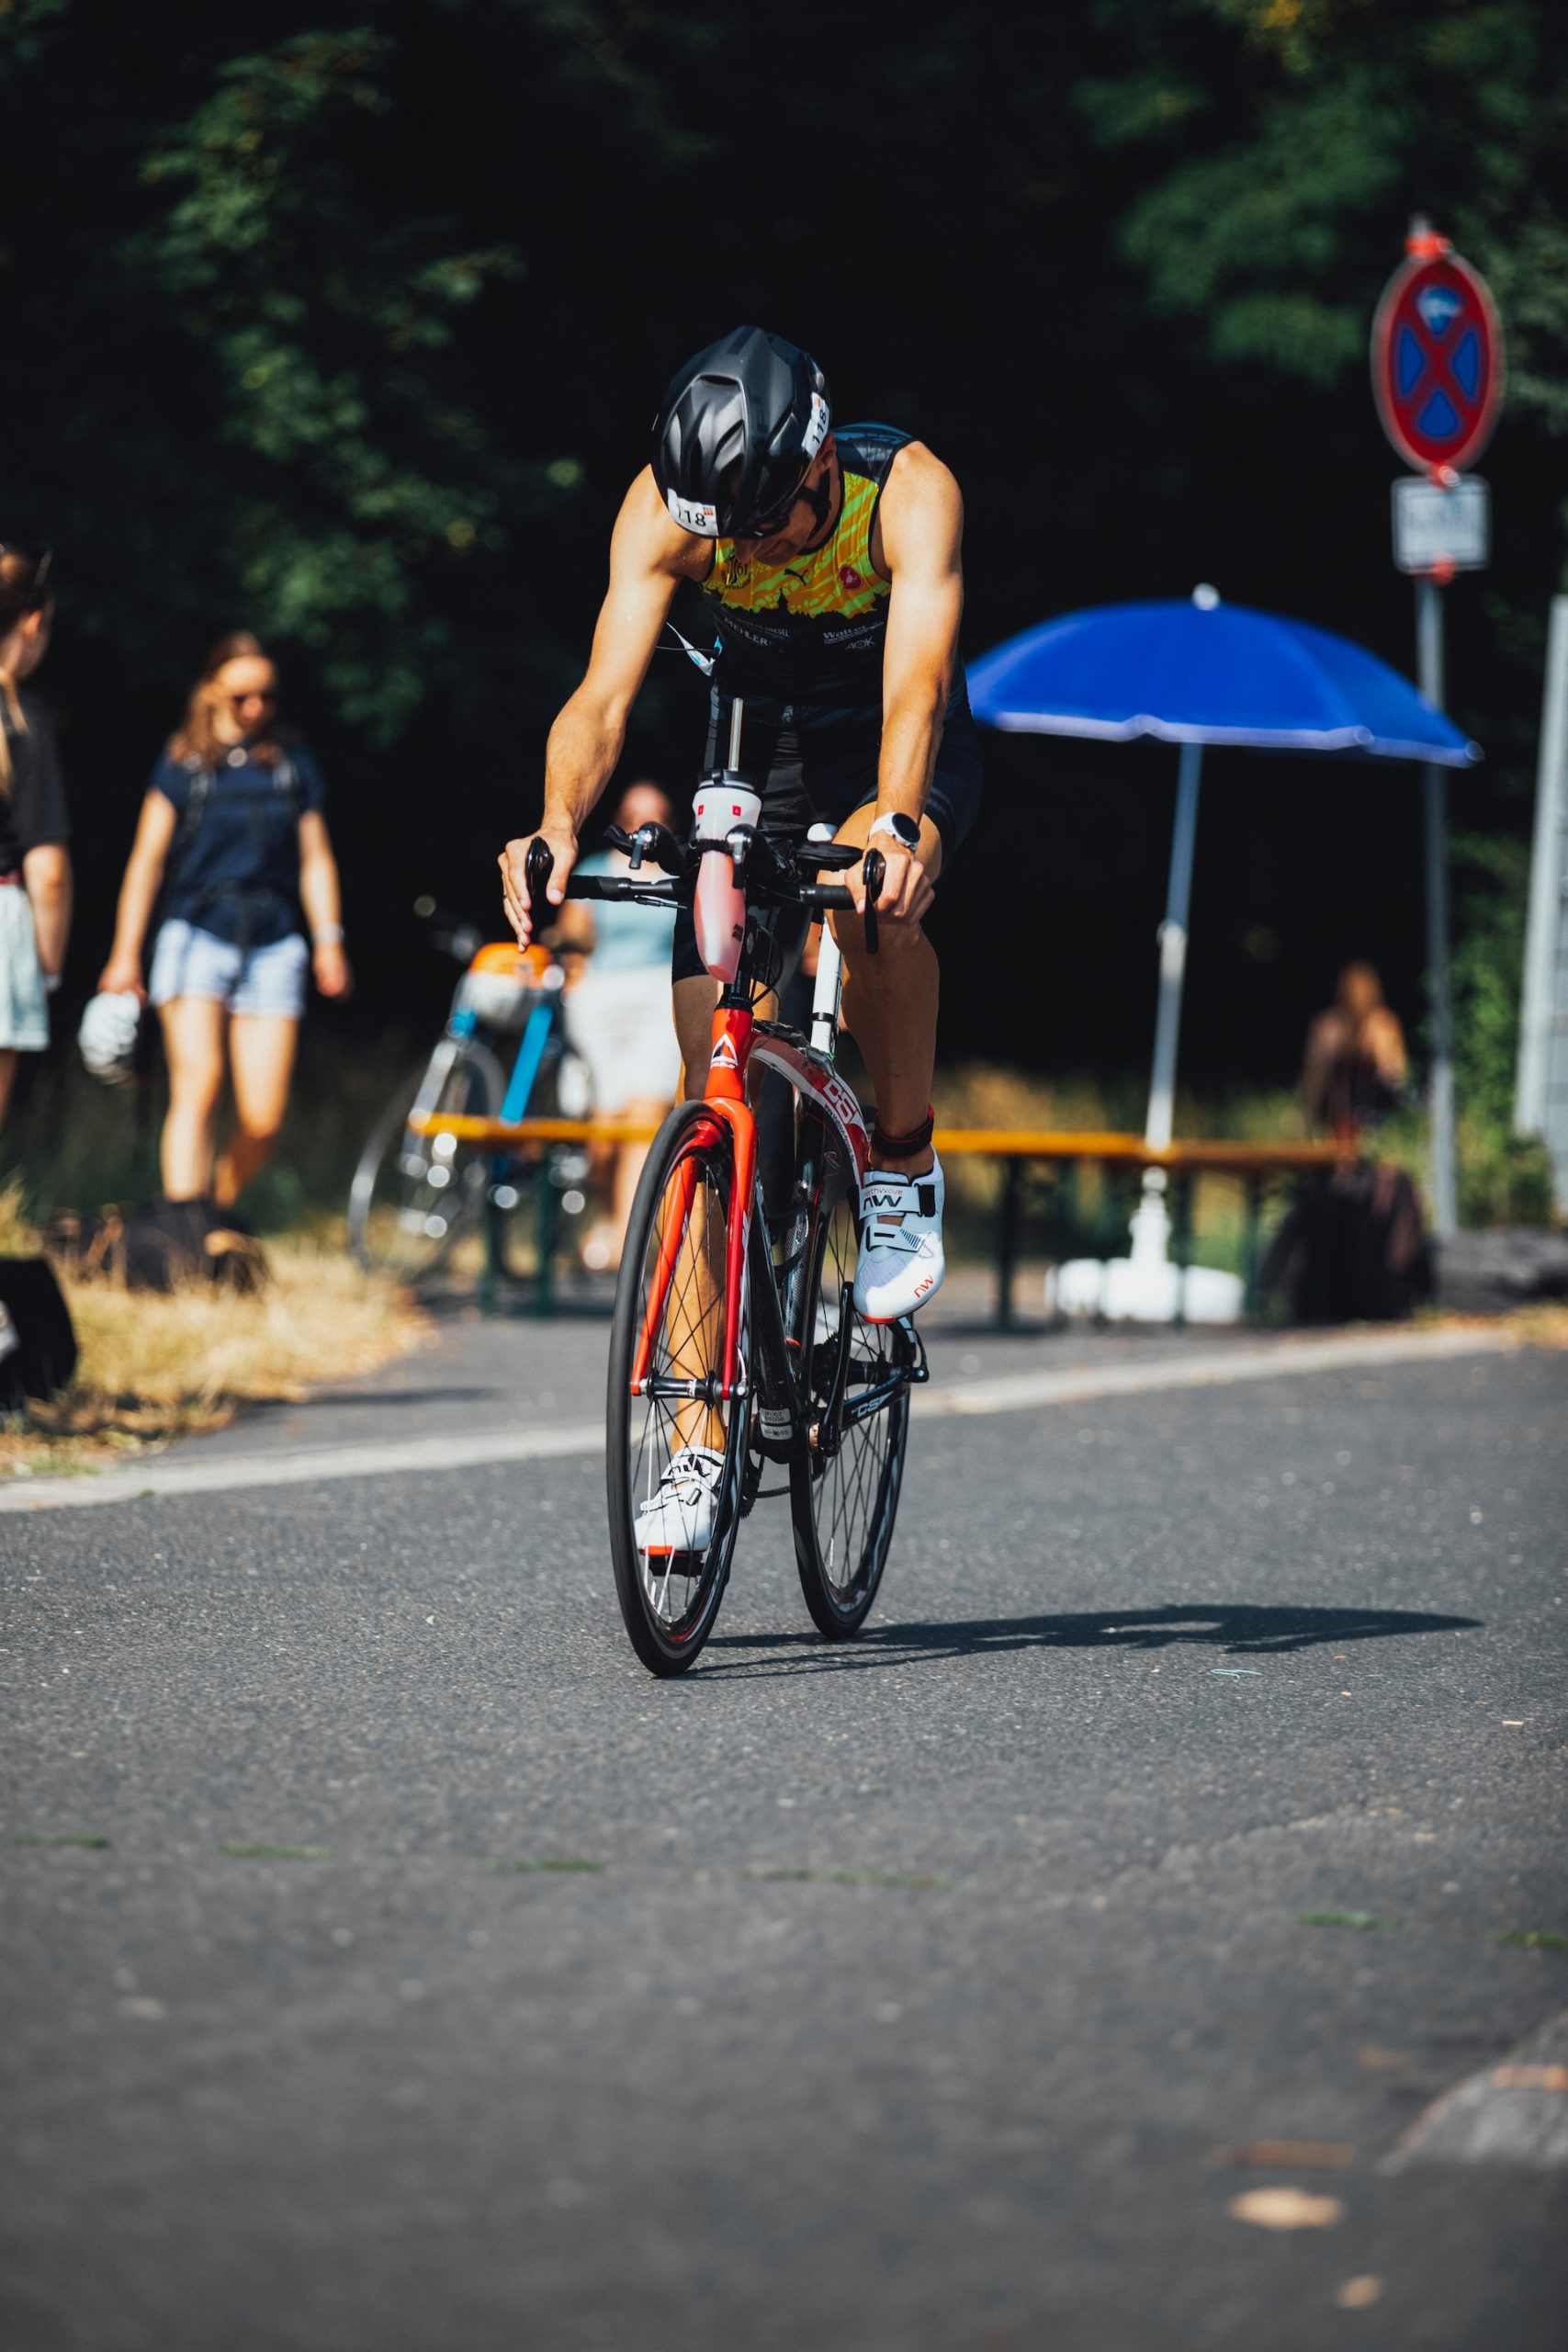 the image shows a man doing bicycling triathlon